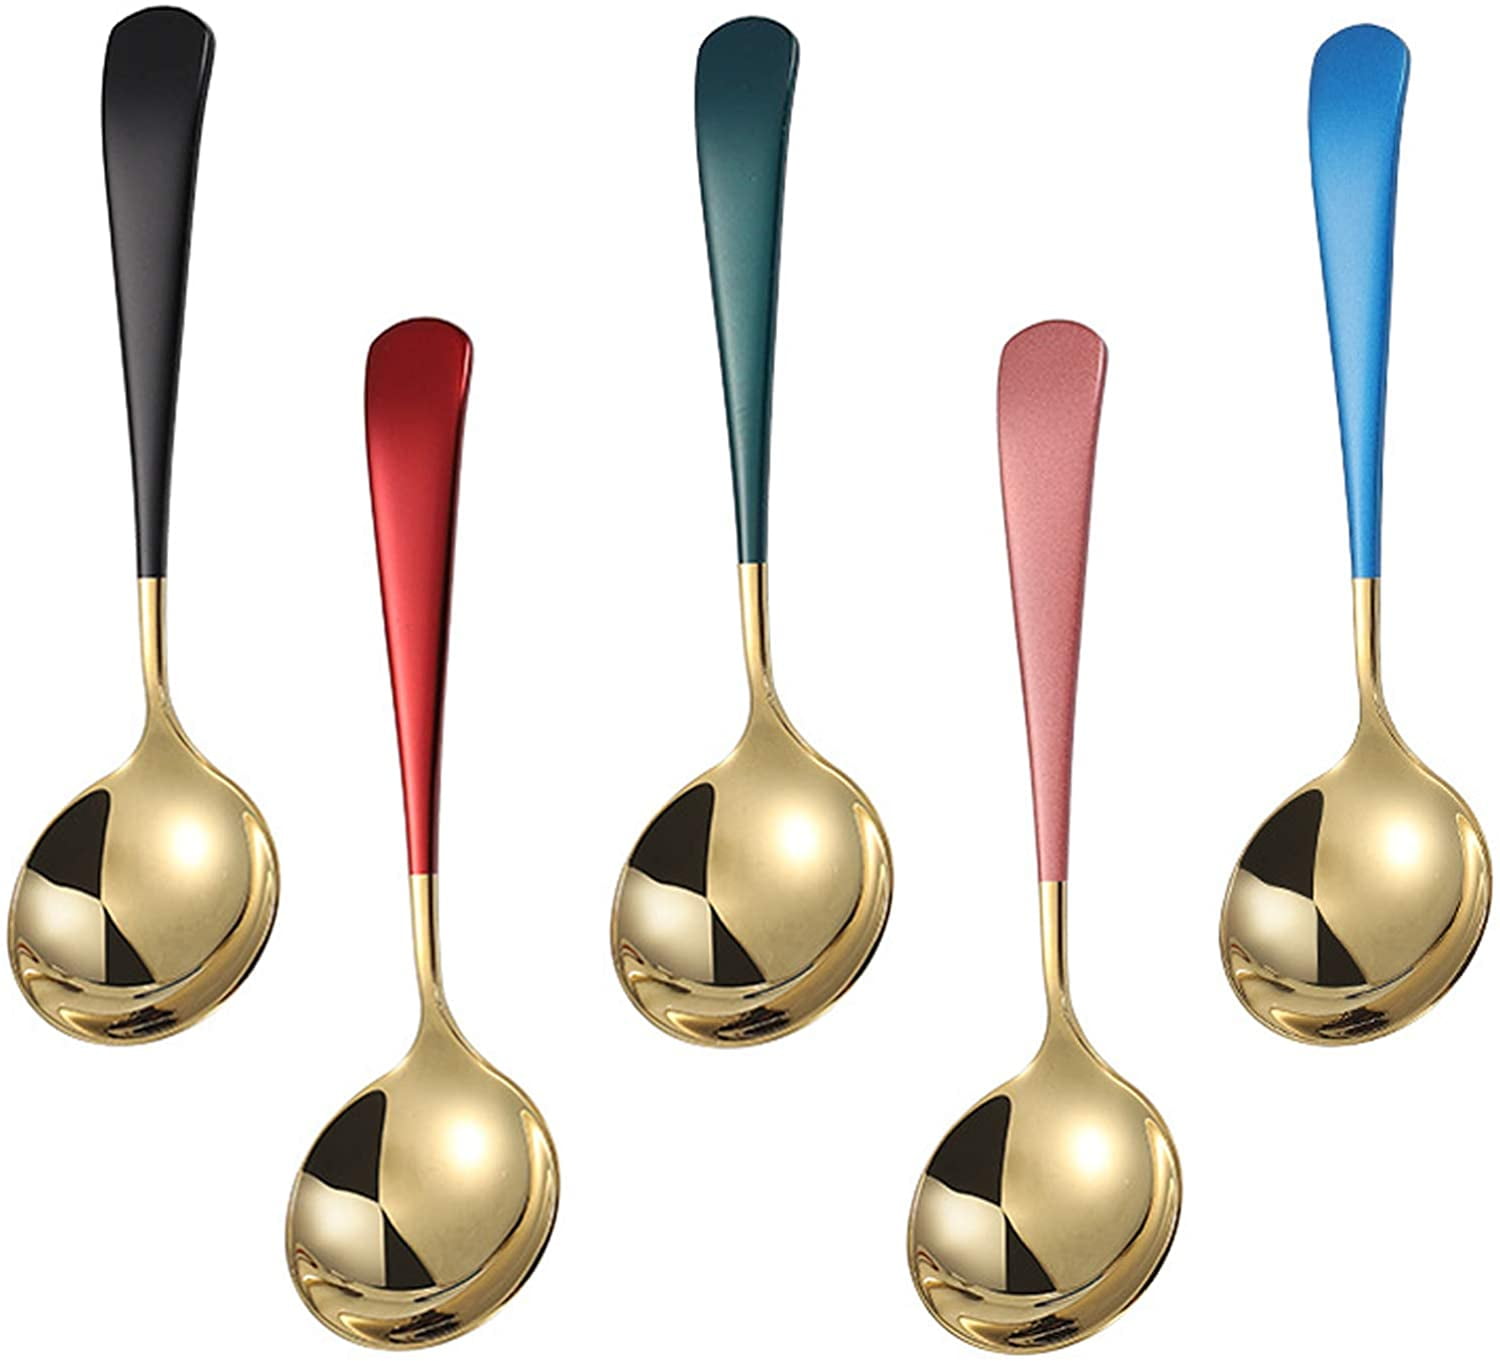 EATOP INC Metal Soup Spoons,Stainless Steel Spoons for Soup Round Colorful Dinner Spoons Thick Short handle Table Spoon 6.3-Inch, Set of 5 (Gold)